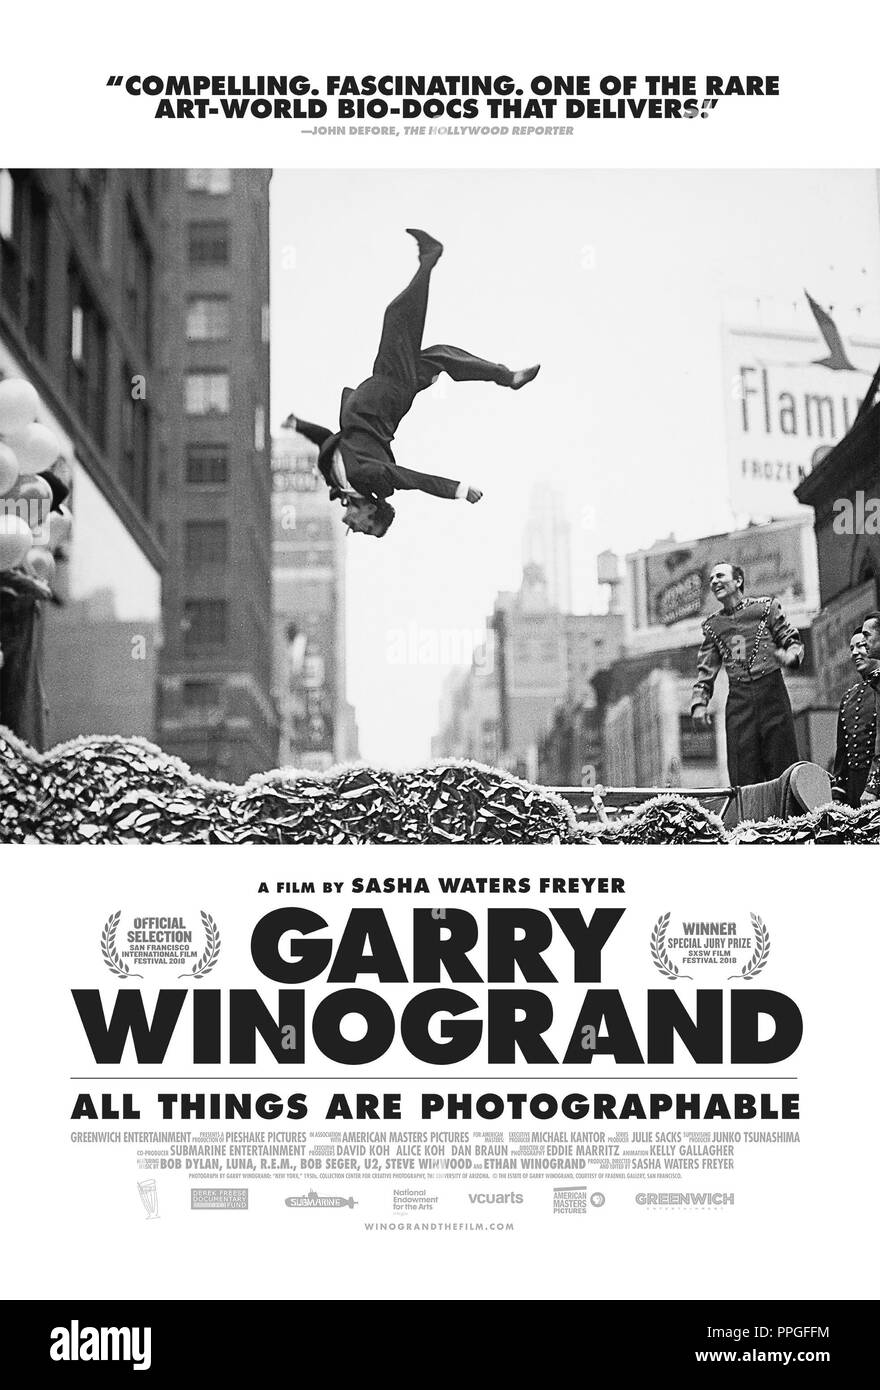 GARRY WINOGRAND: ALL THINGS ARE PHOTOGRAPHABLE, US poster, 2018. ©Greenwich Entertainment/courtesy Everett Collection. Stock Photo